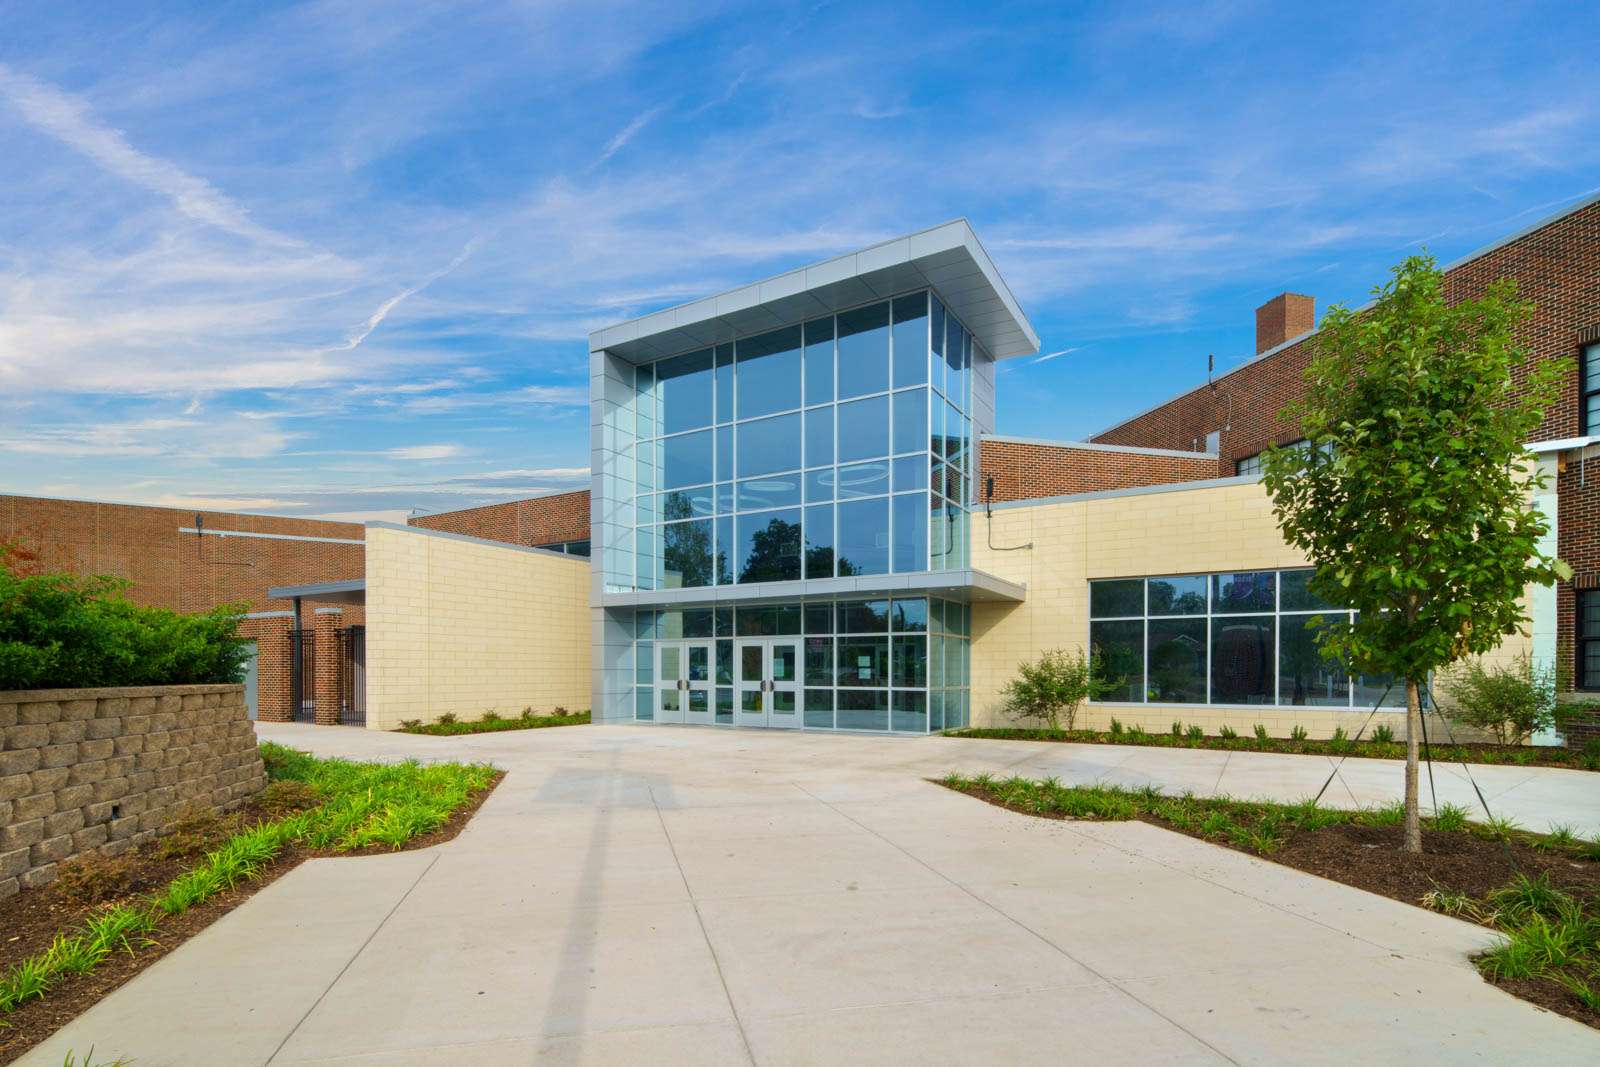 Exterior of Sunset High School in Dallas, Texas